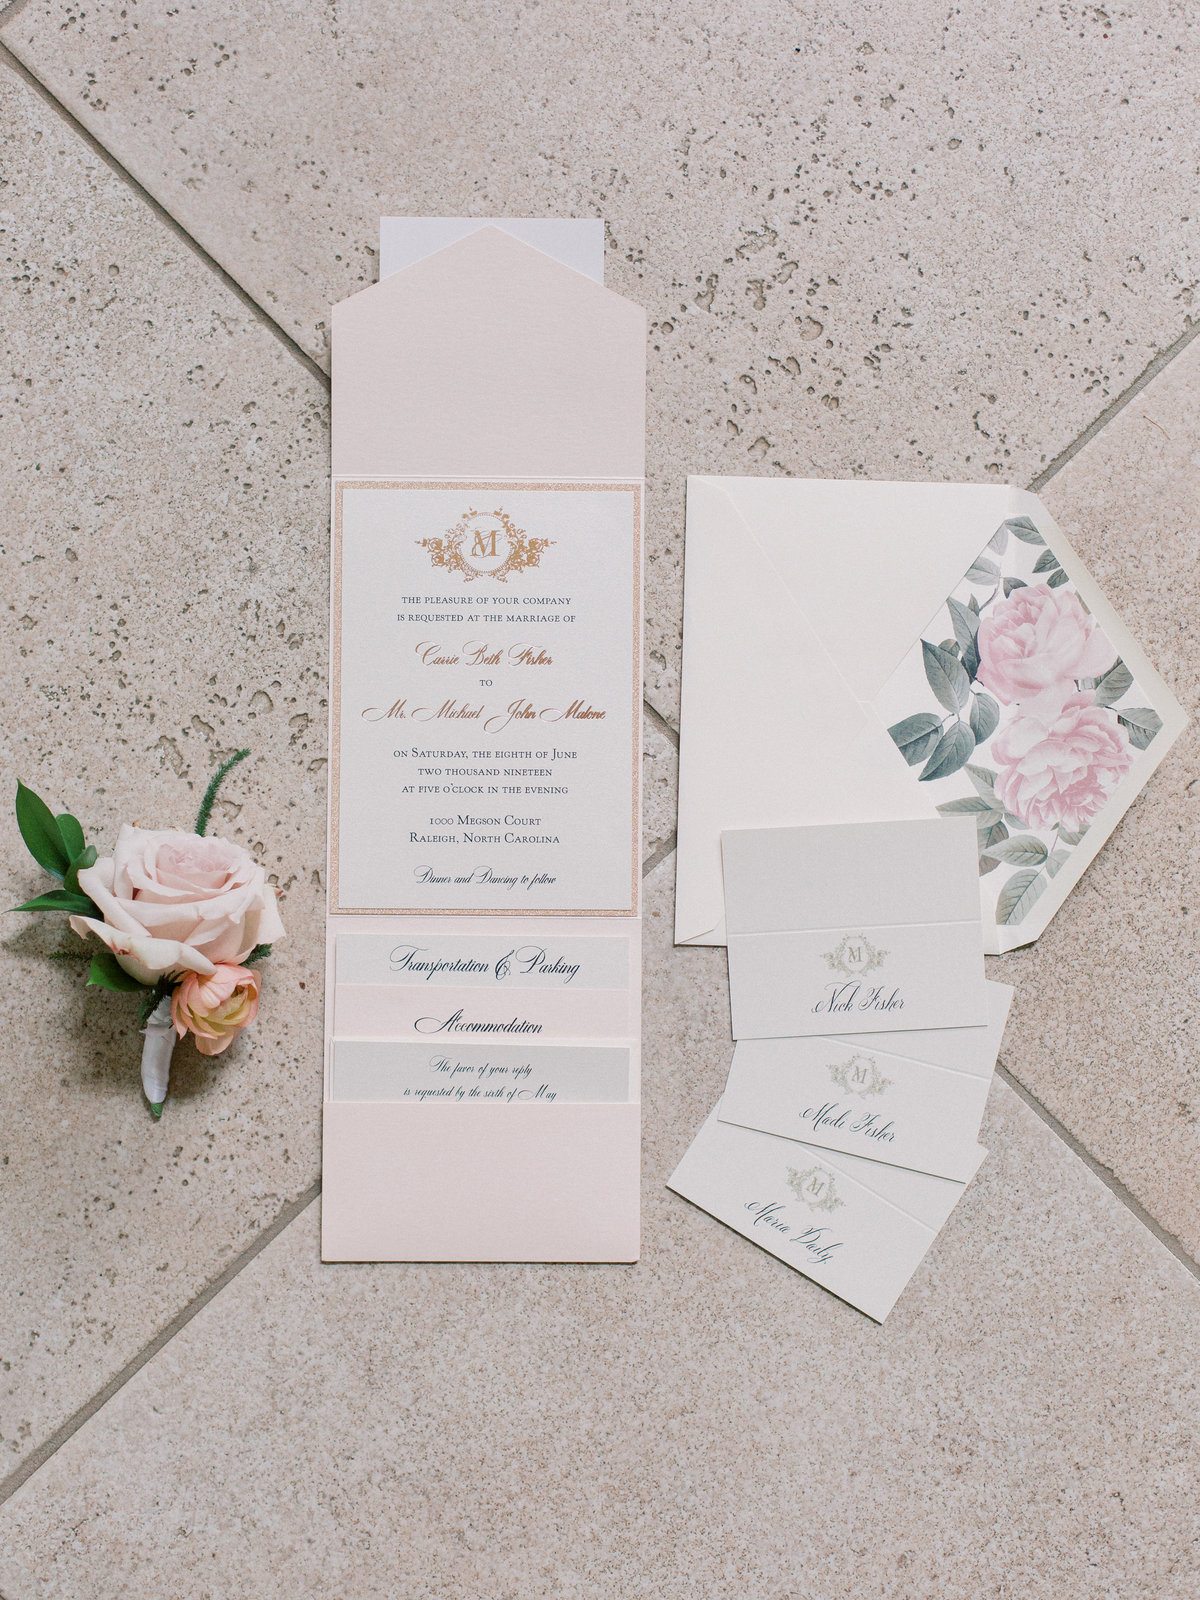 2019-06-08Carrie&MikeWedding-1